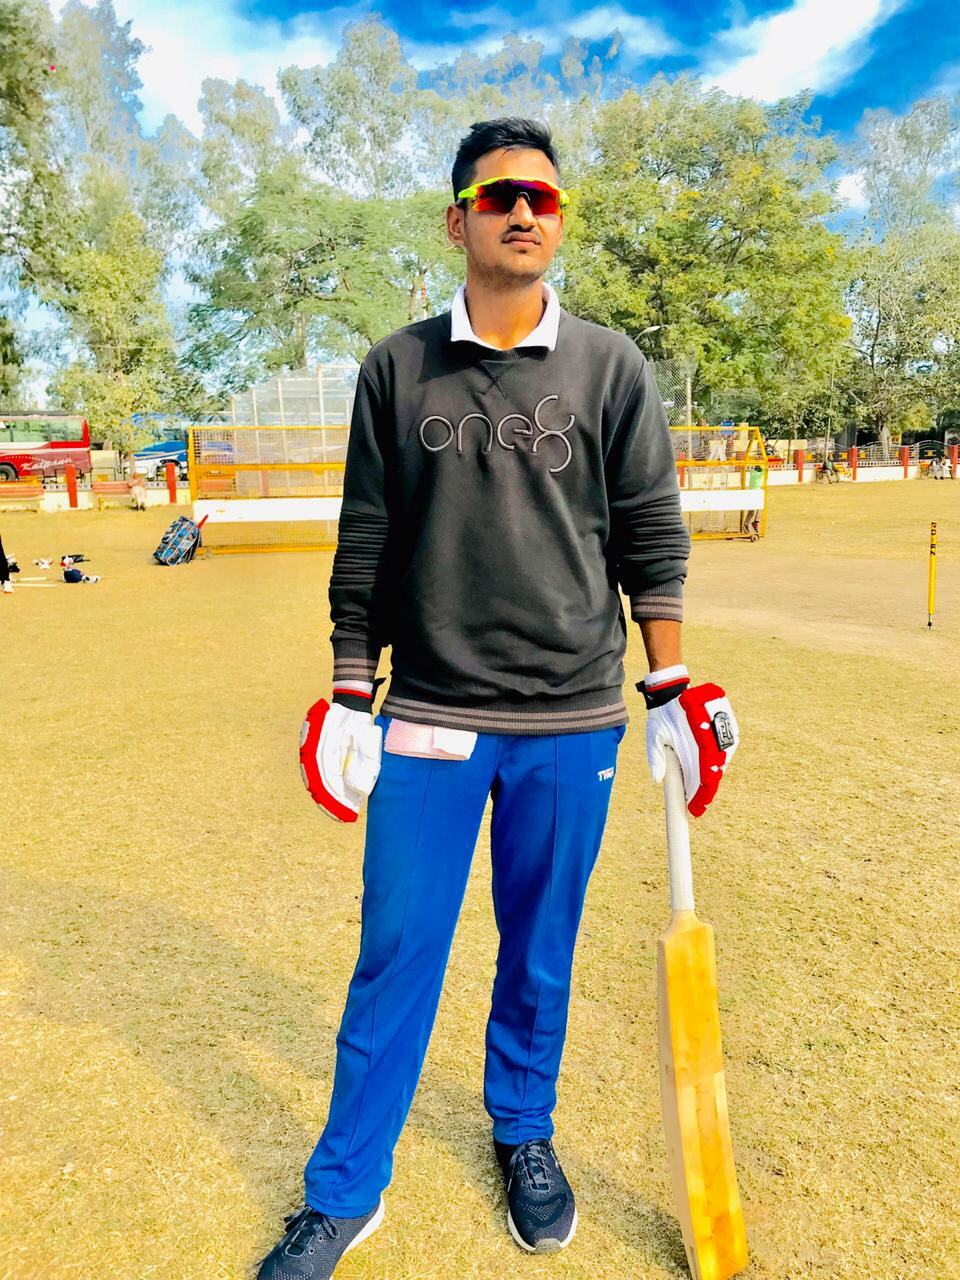 No success without struggle - young cricketer Rajpal Singh Solanki talks about his journey